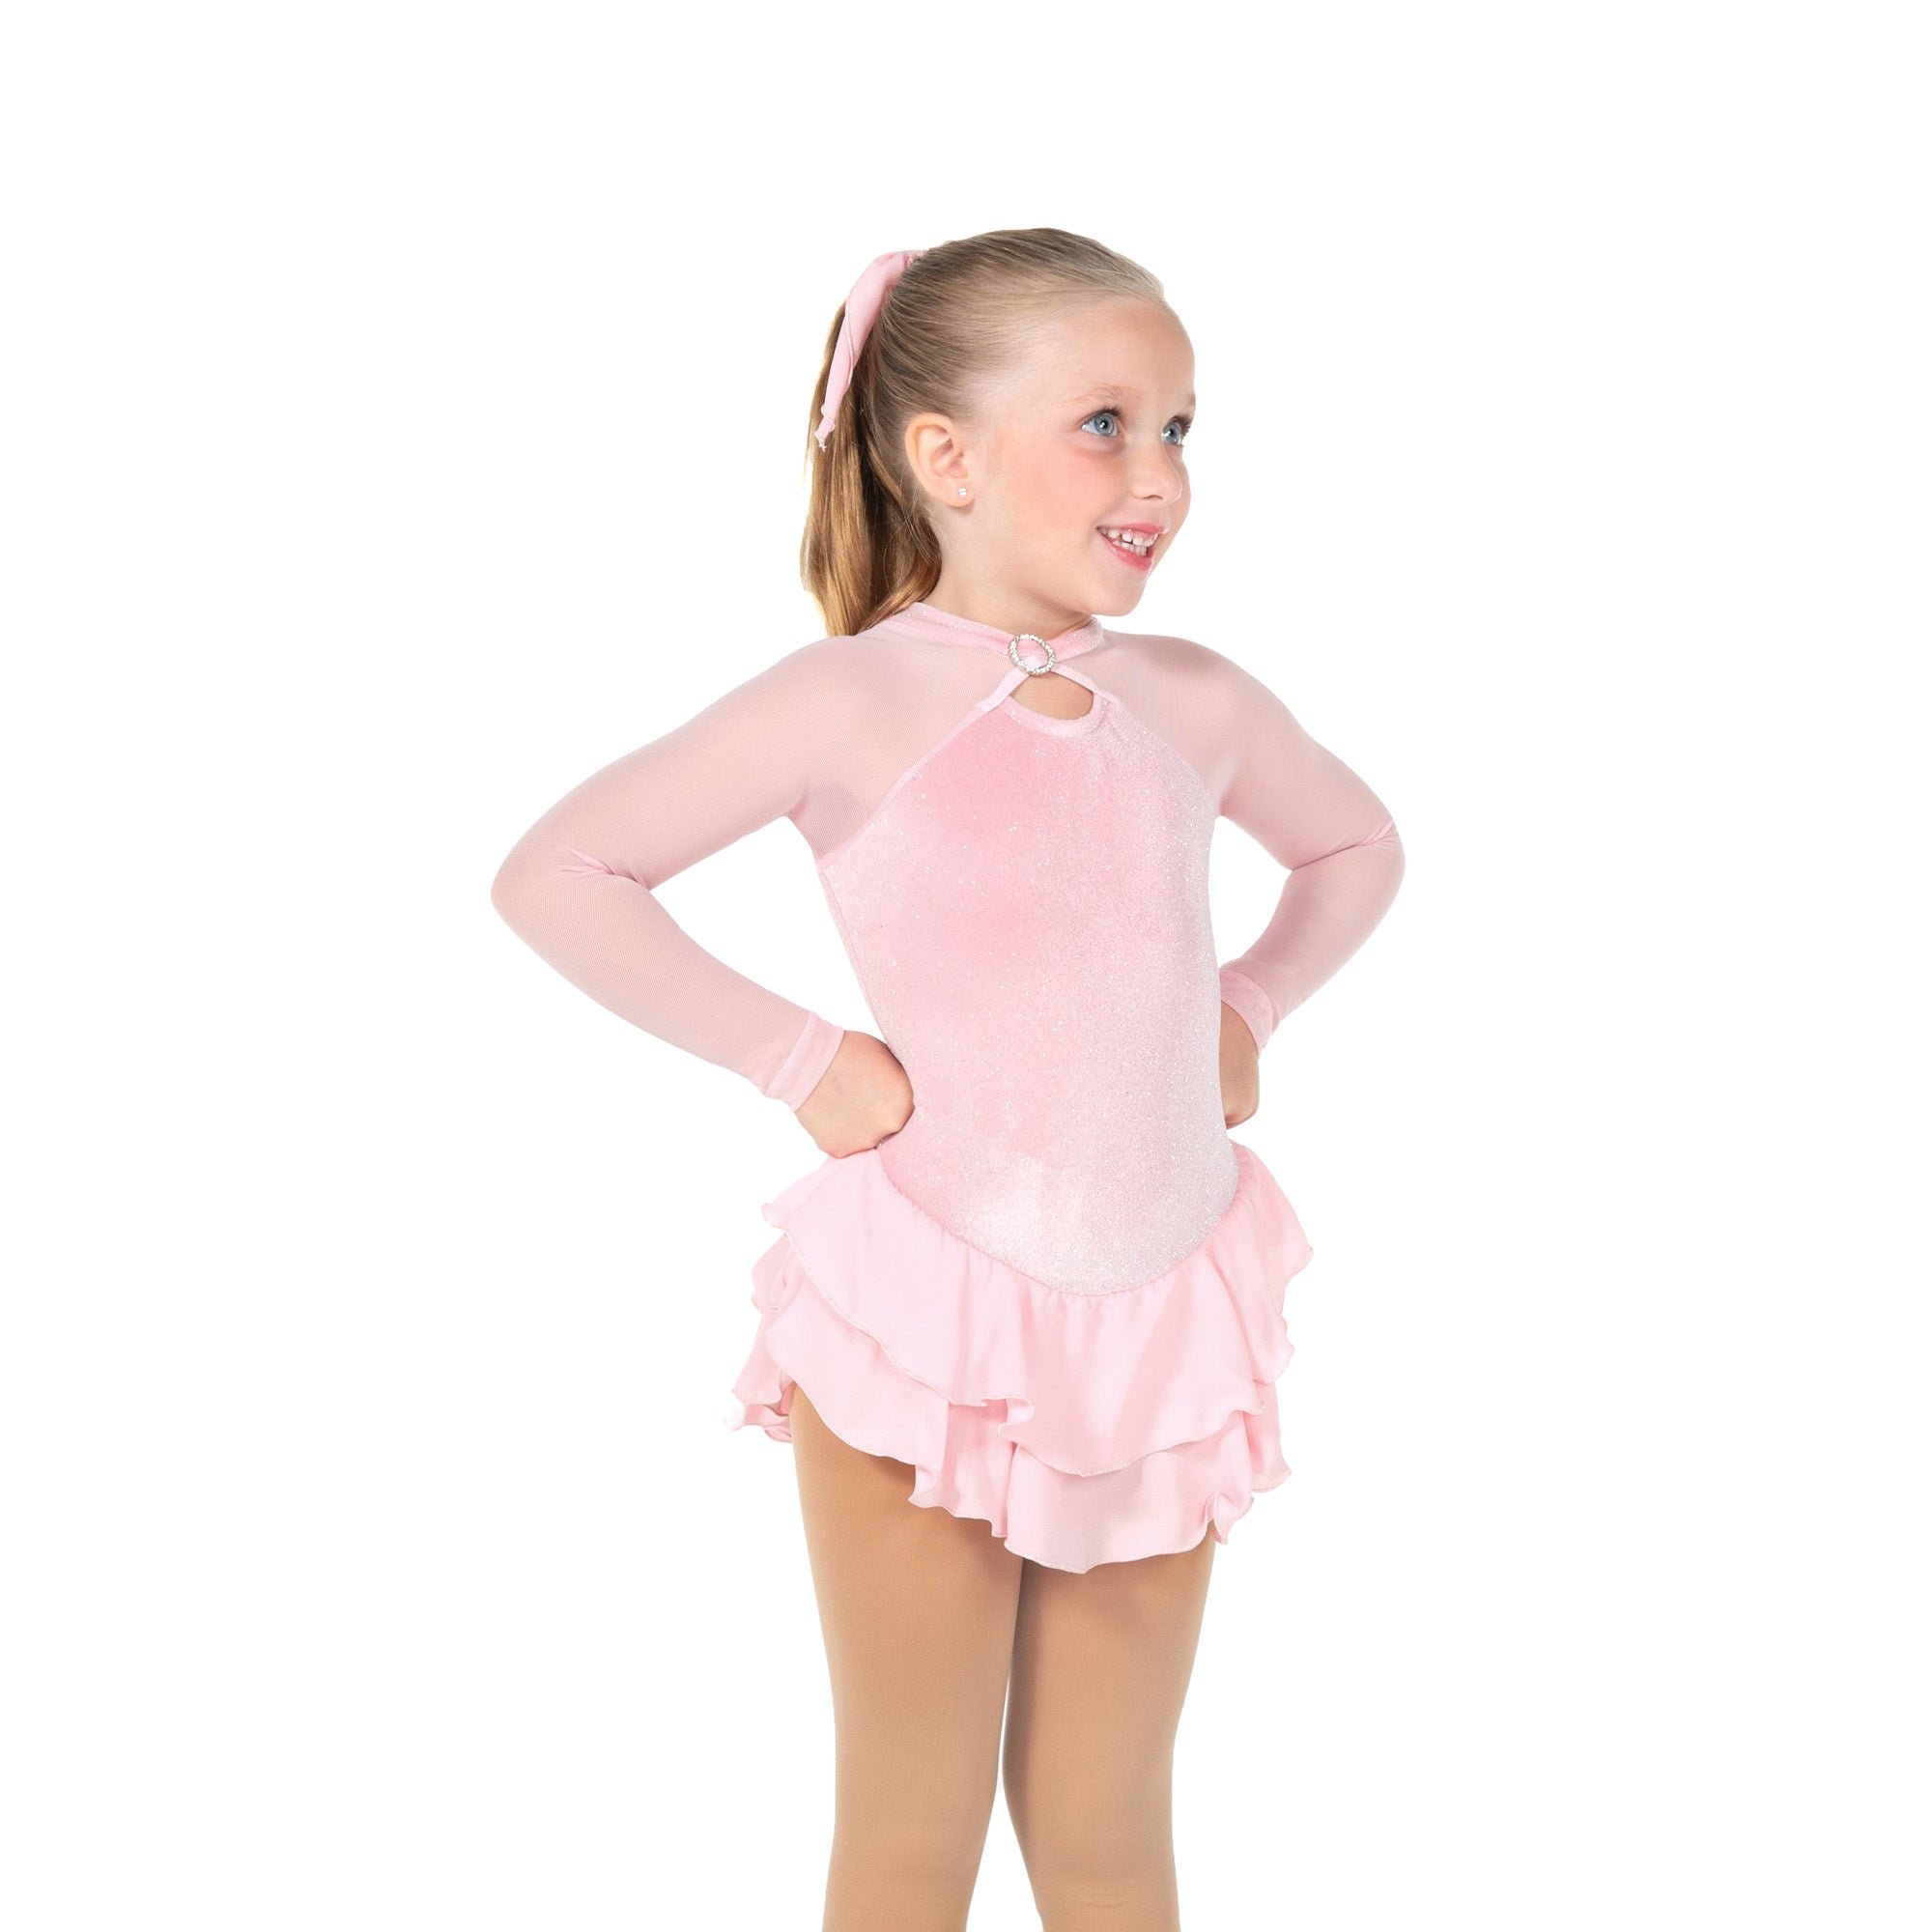 179 Shimmer Skating Dress in Pink by Jerry's